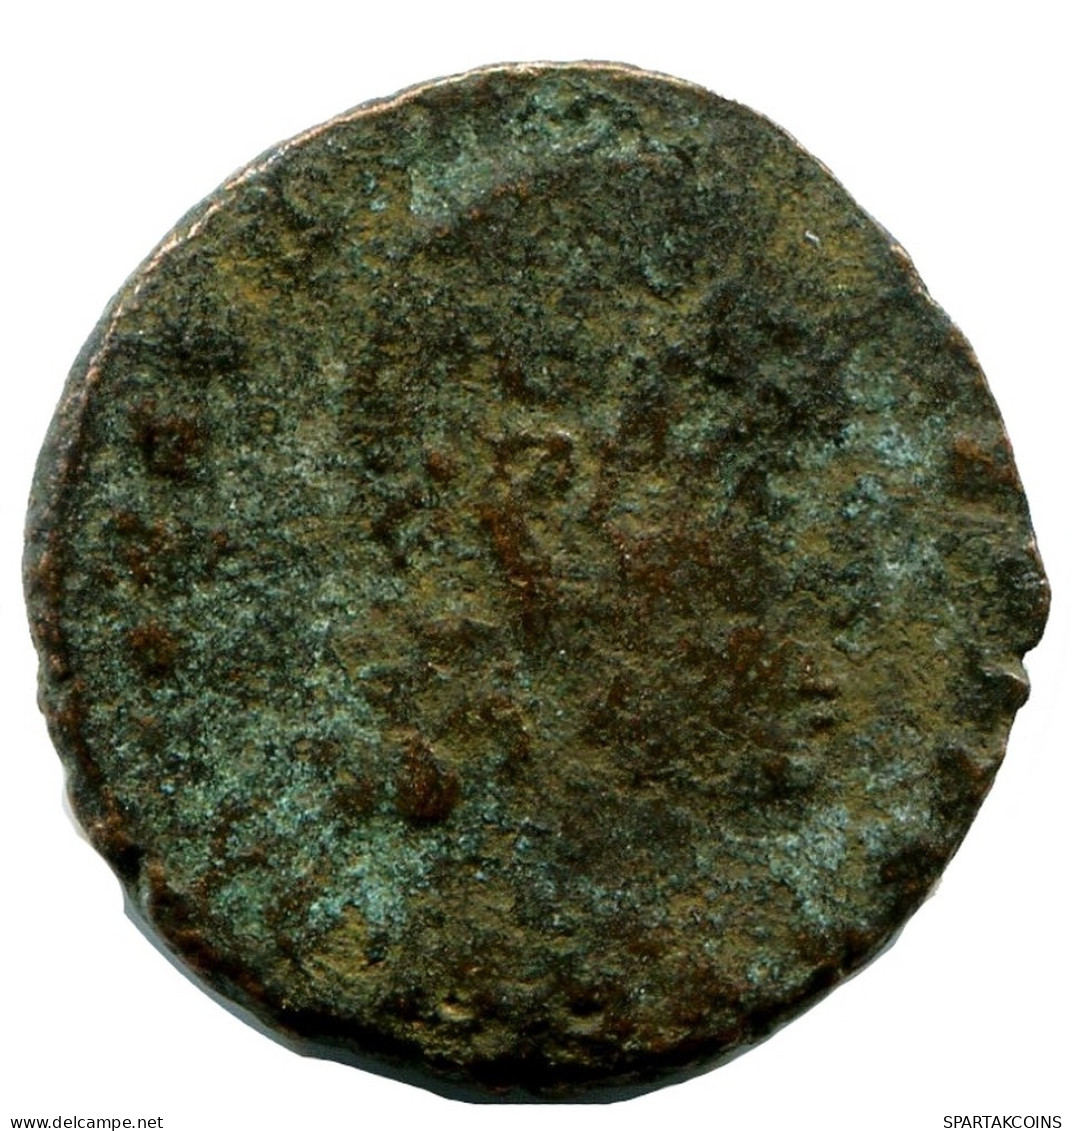 RÖMISCHE Münze MINTED IN CONSTANTINOPLE FOUND IN IHNASYAH HOARD #ANC11060.14.D.A - The Christian Empire (307 AD Tot 363 AD)